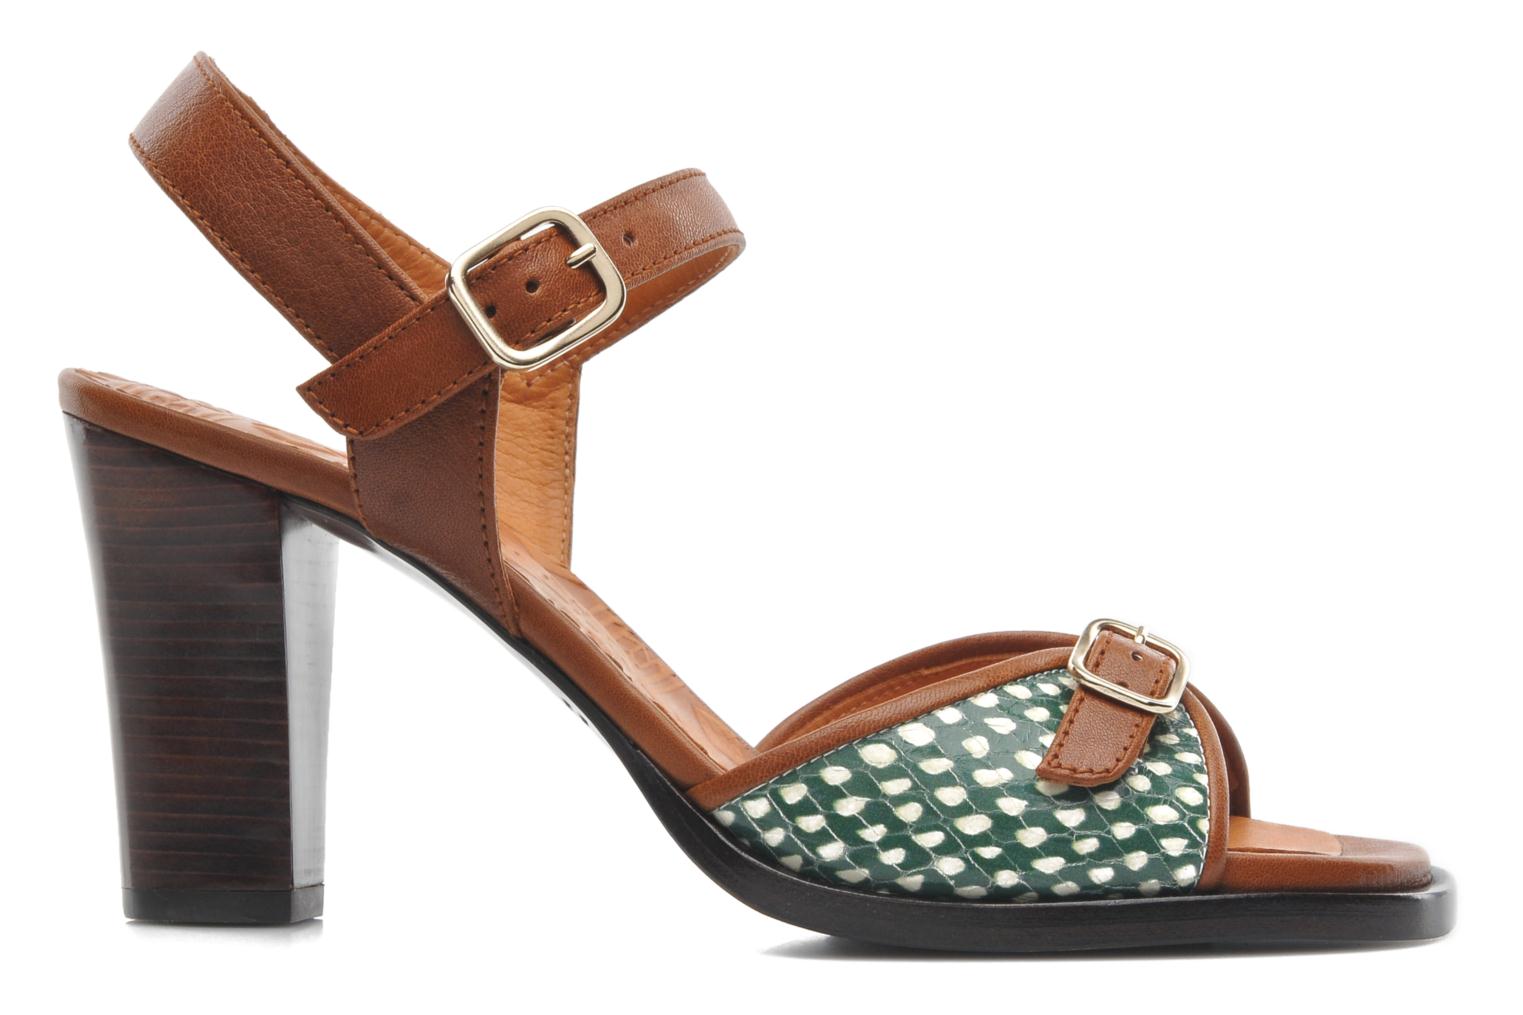 Chie Mihara Zapeo Sandals in Multicolor at Sarenza.co.uk (208149)